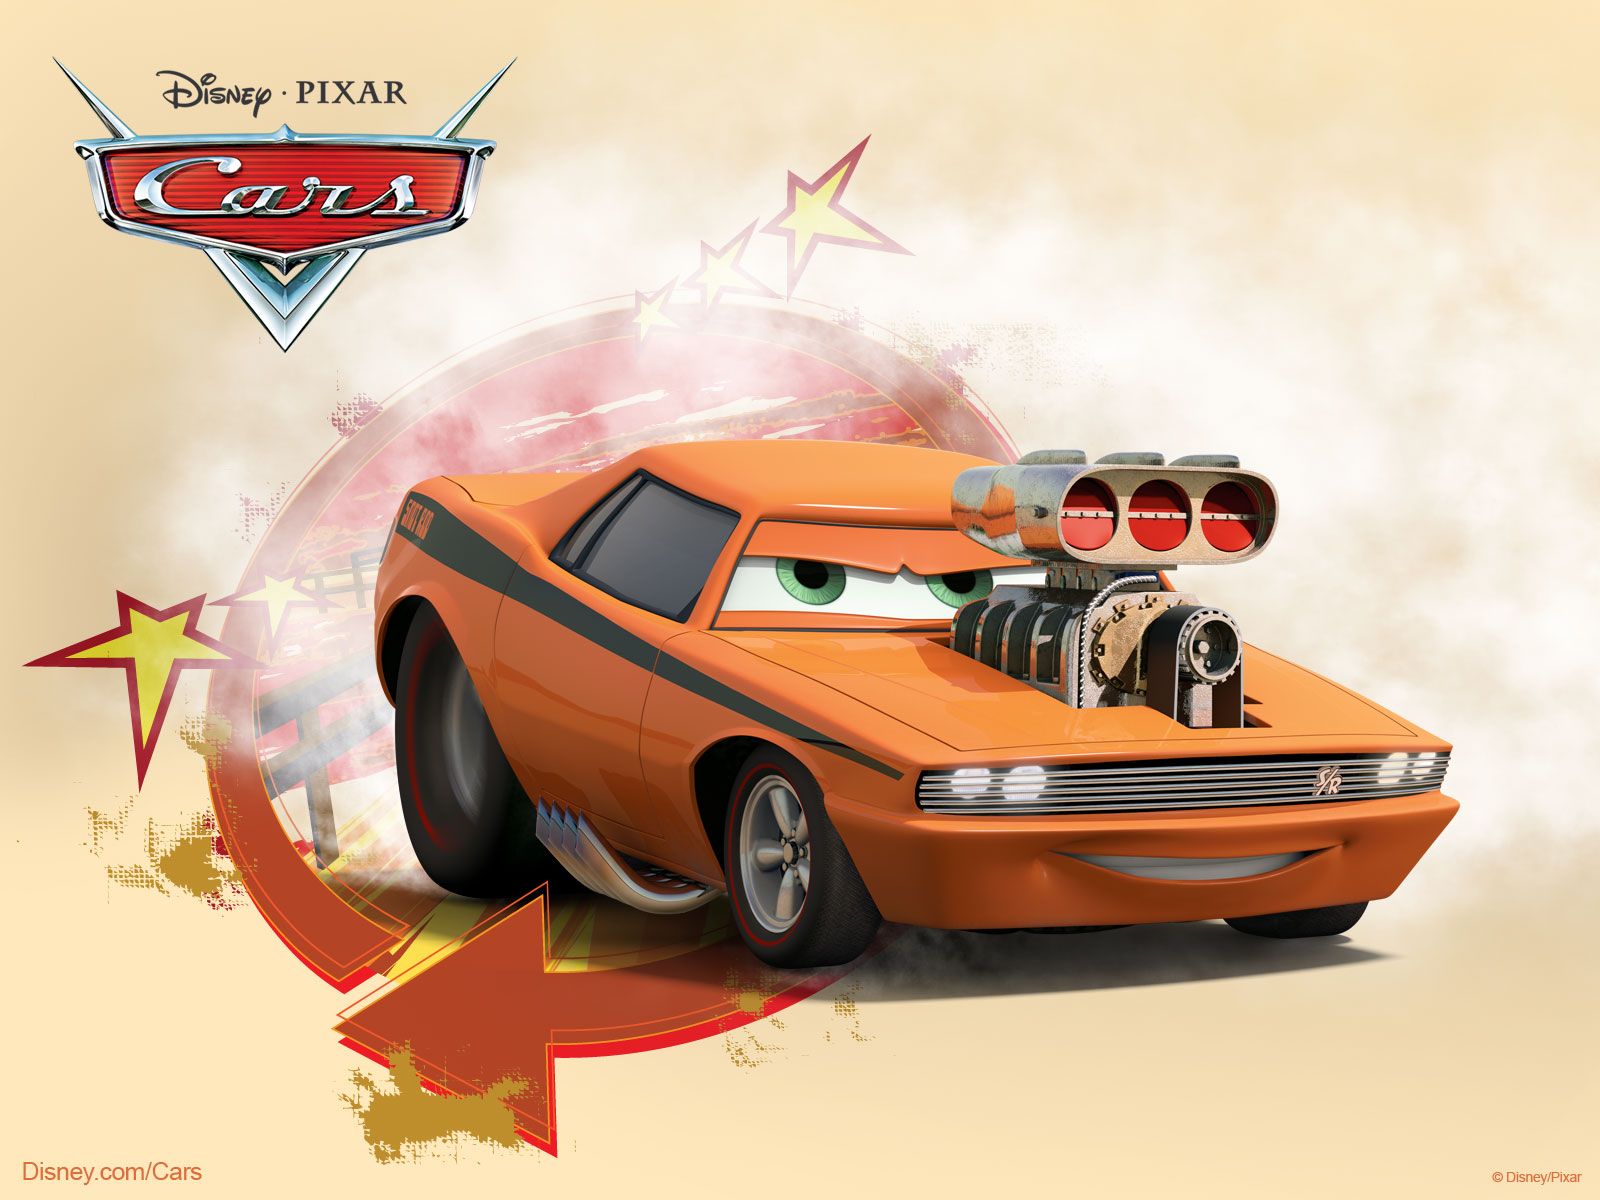 Snot Rod the muscle car from the DisneyPixar CG animated movie Cars